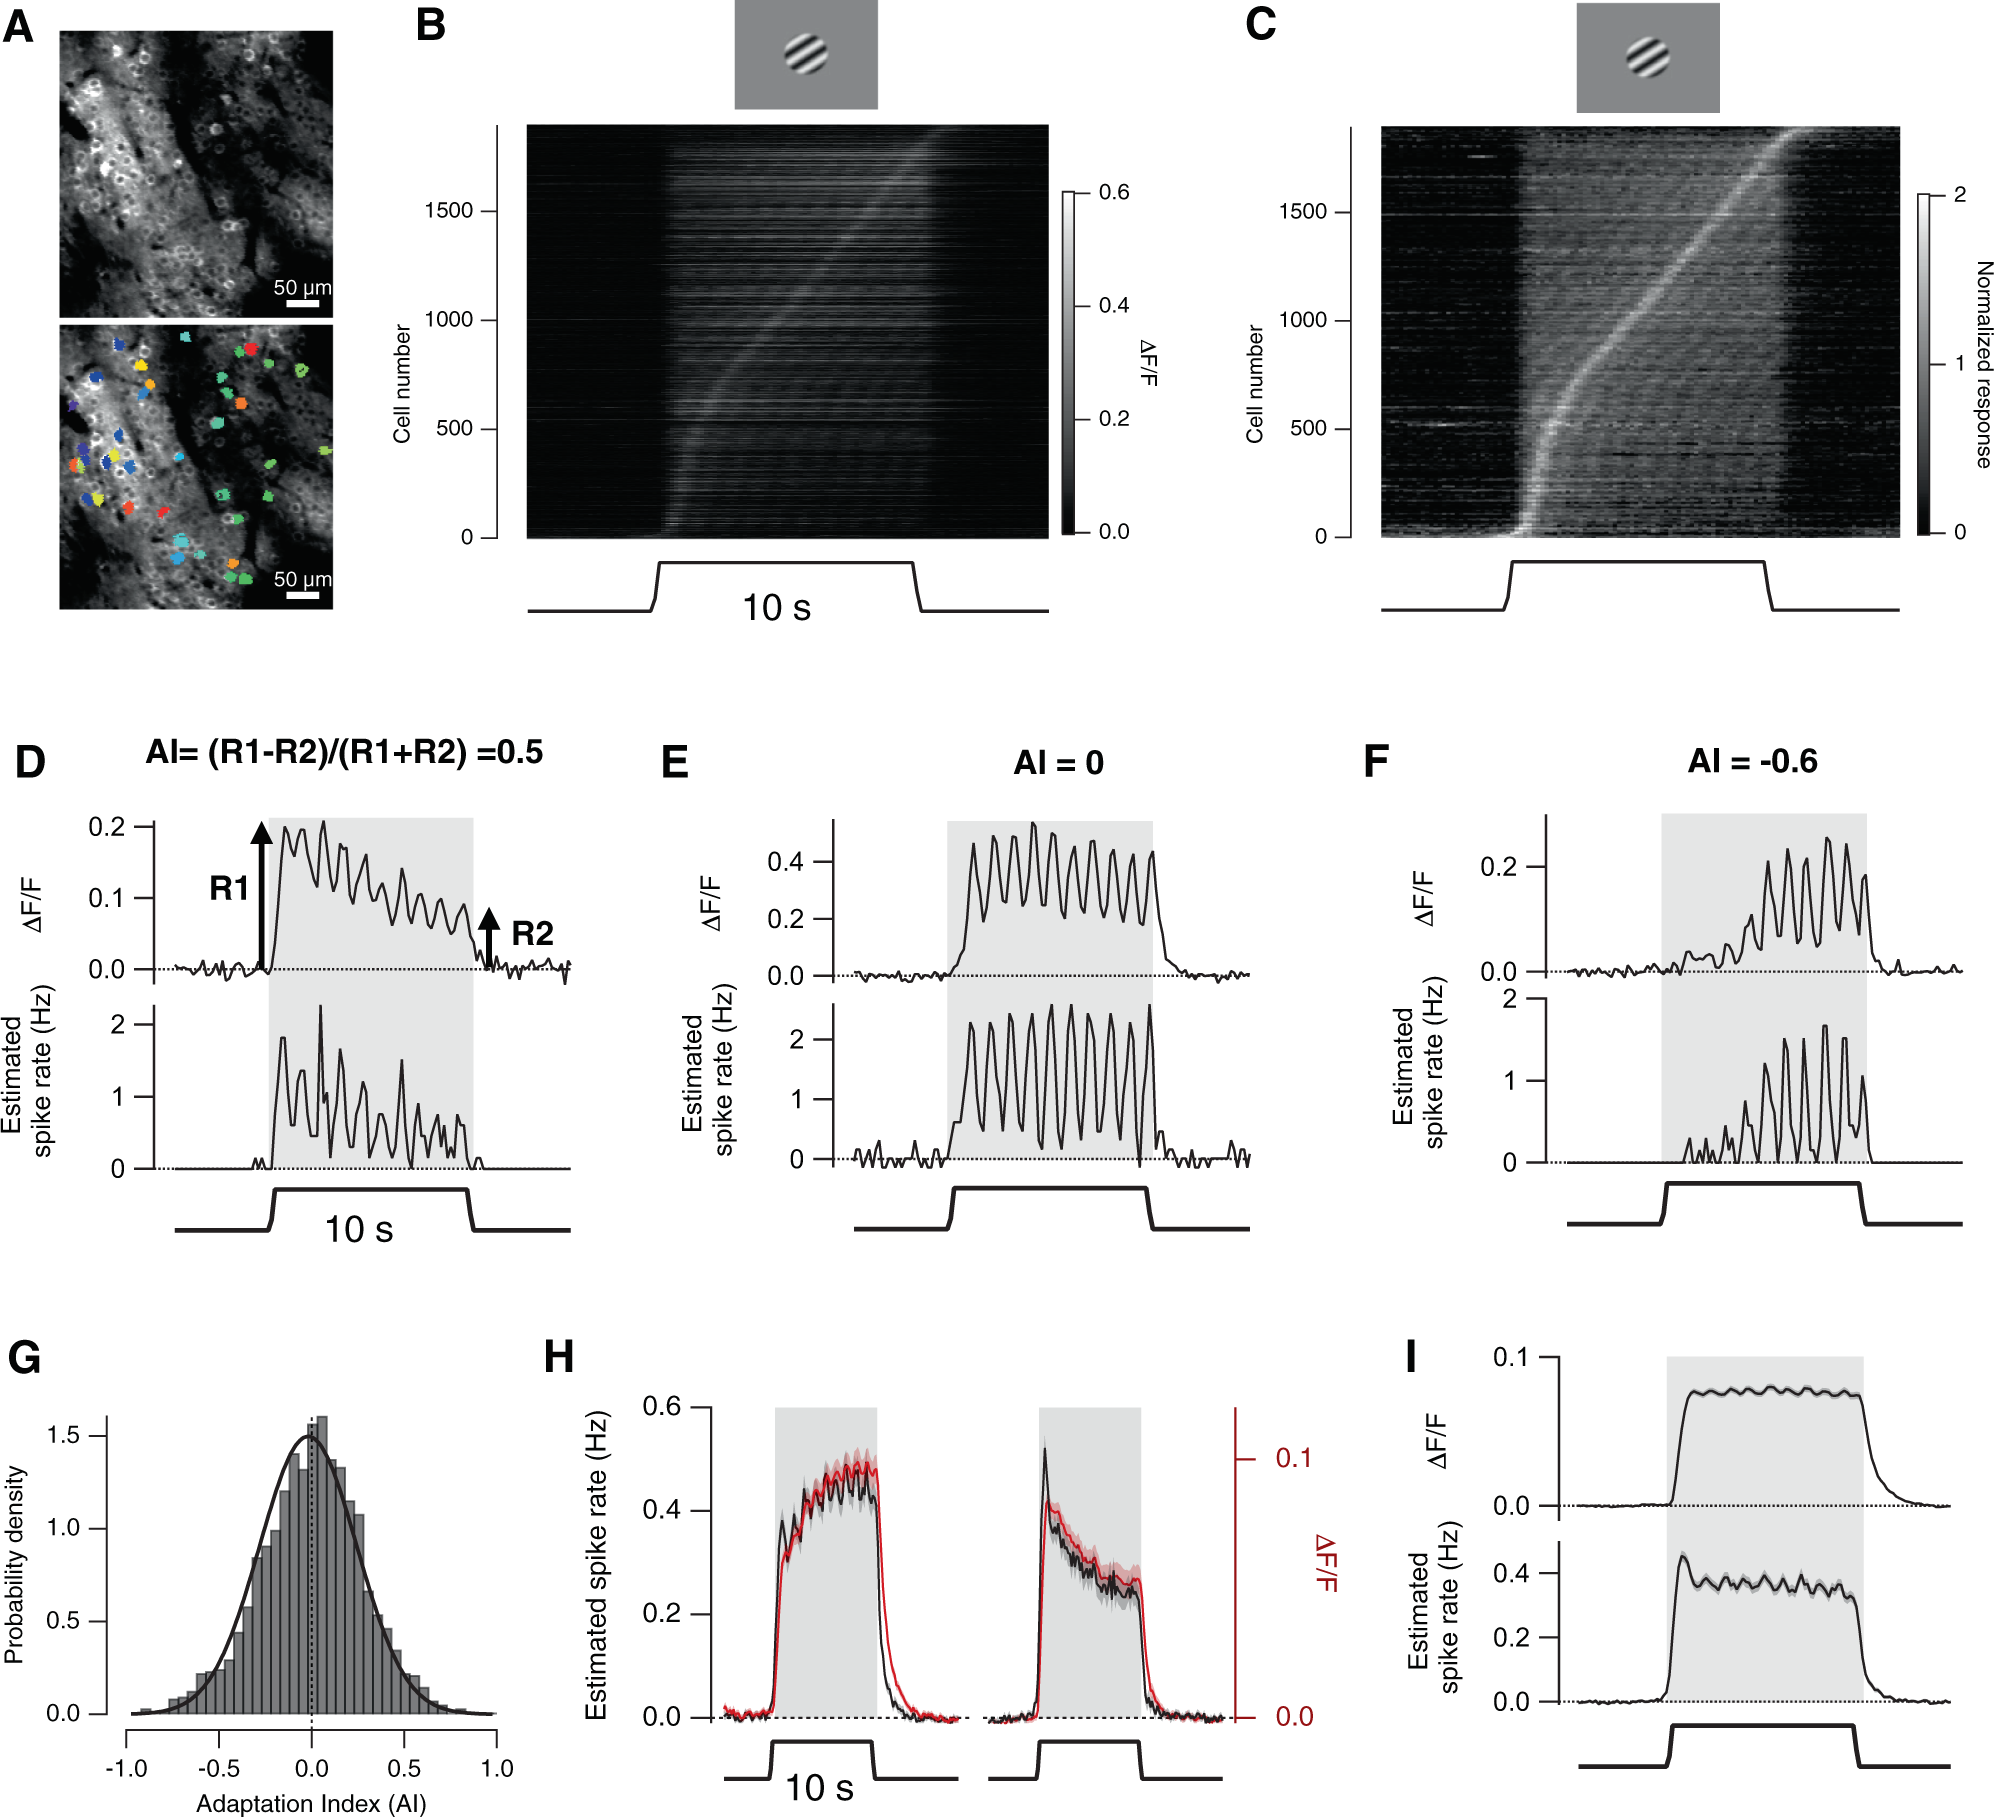 Academy dishonest Booth Opposite forms of adaptation in mouse visual cortex are controlled by  distinct inhibitory microcircuits | Nature Communications